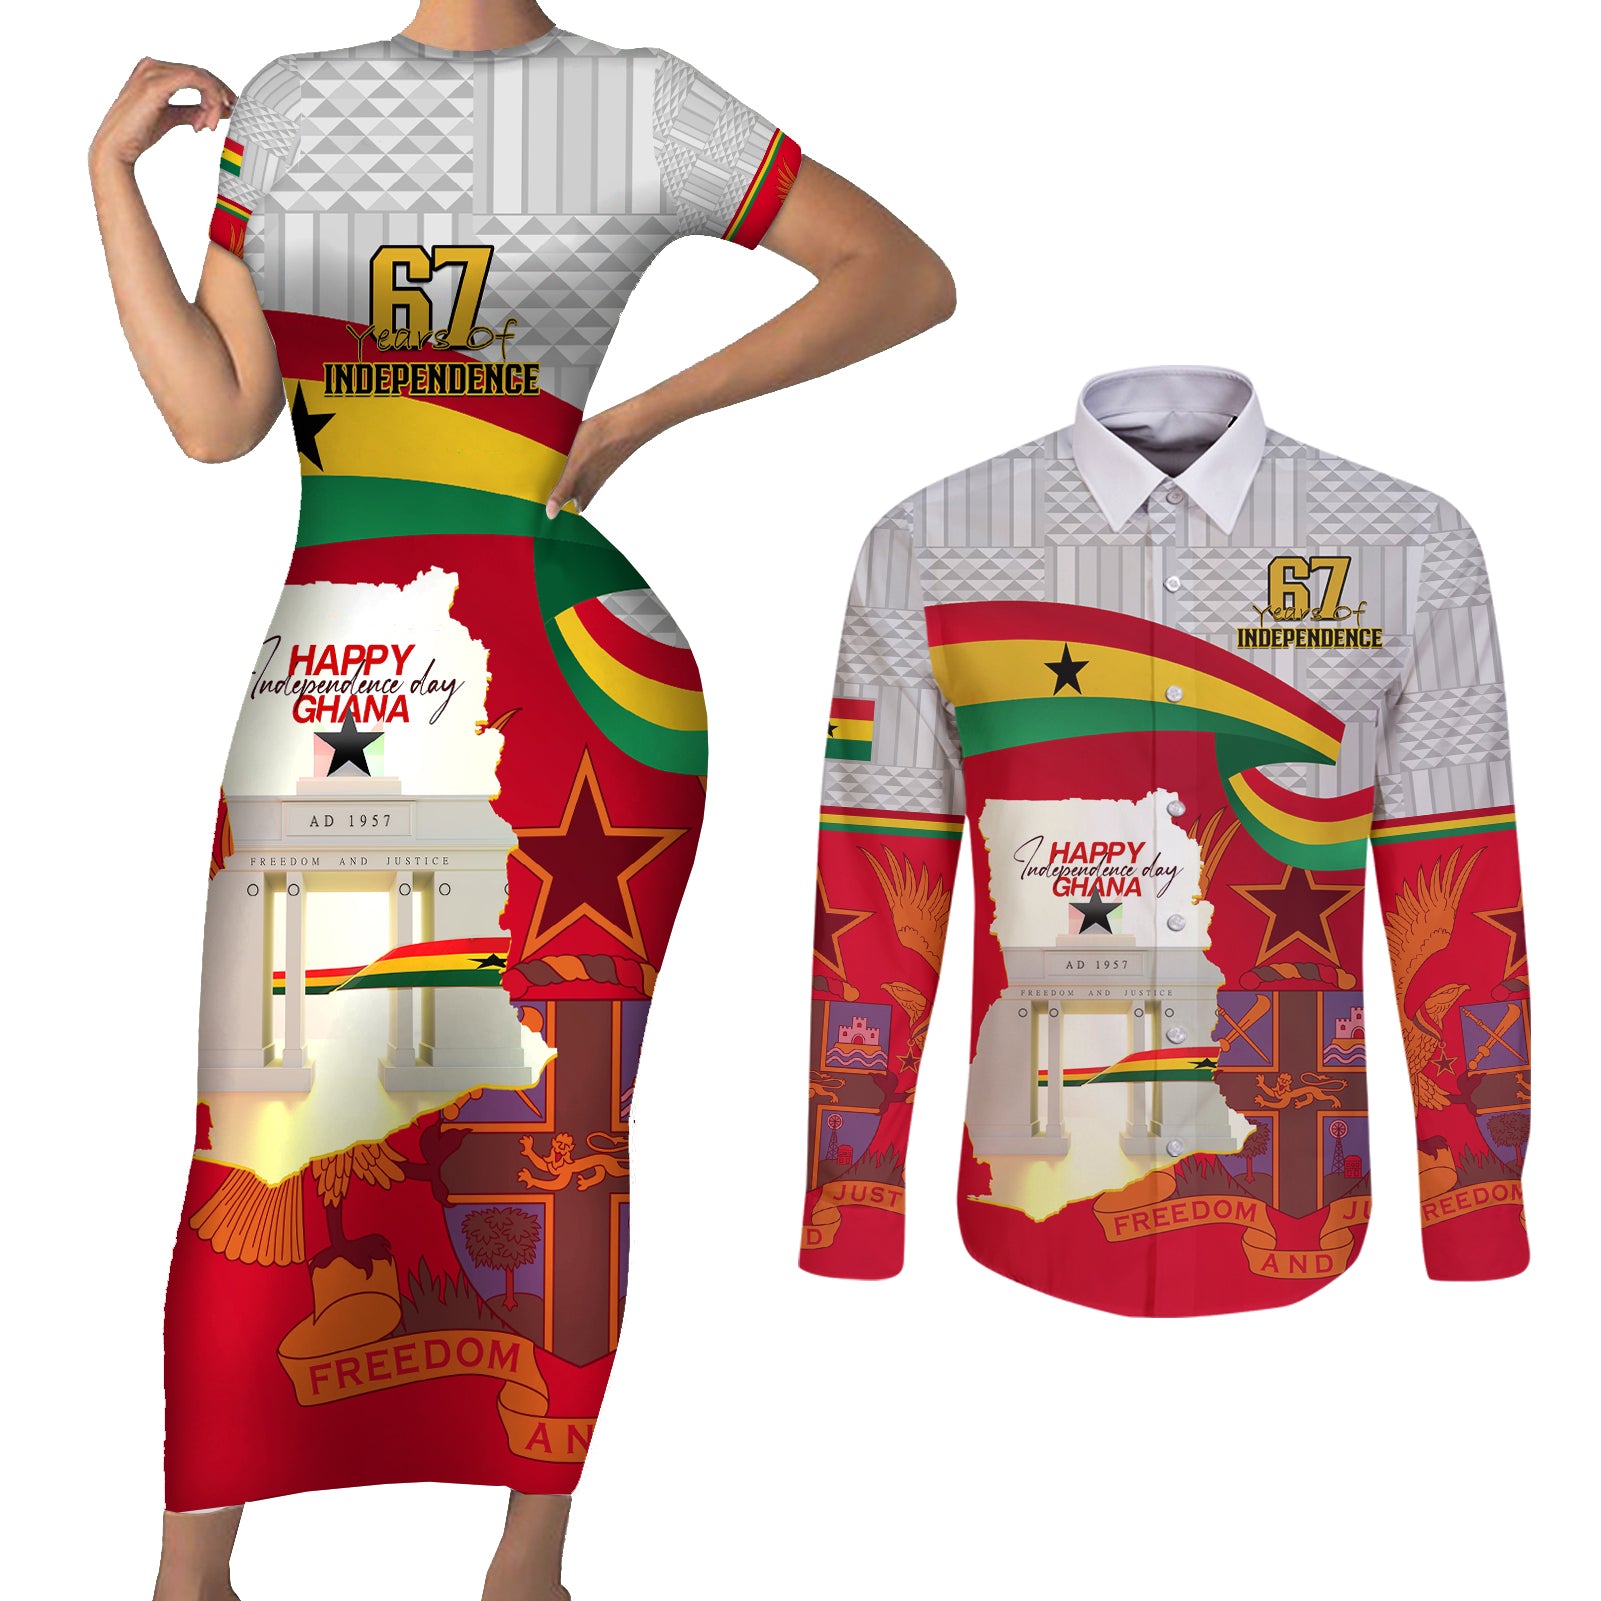 Ghana Independence Day Couples Matching Short Sleeve Bodycon Dress and Long Sleeve Button Shirt Gana Map Happy 67 Years Anniversary